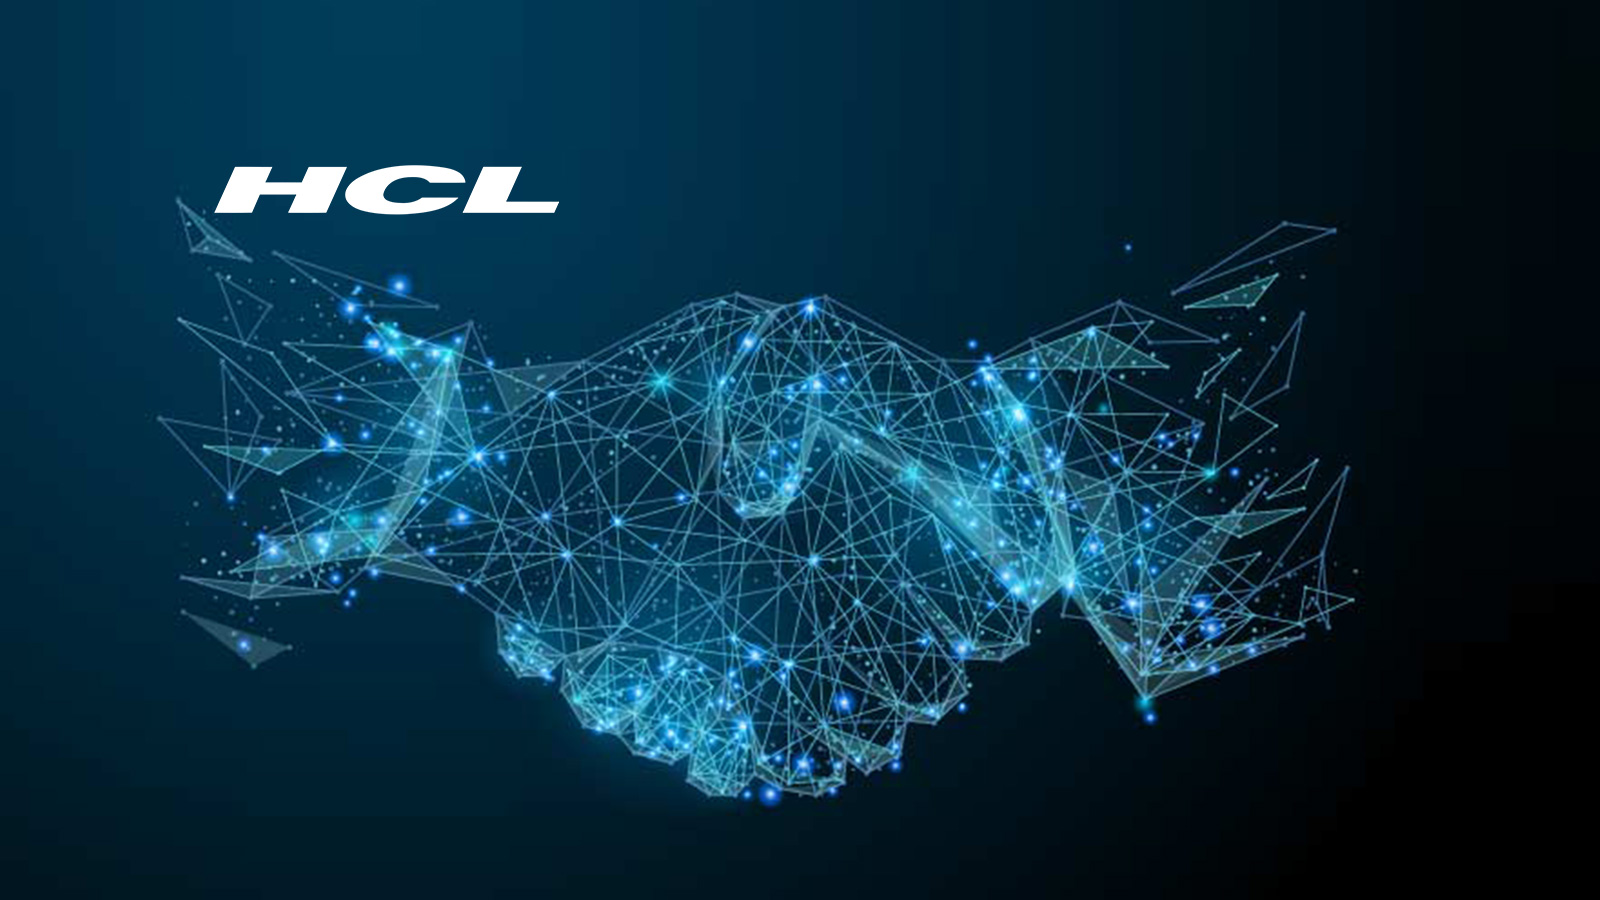 Hcl wallpapers